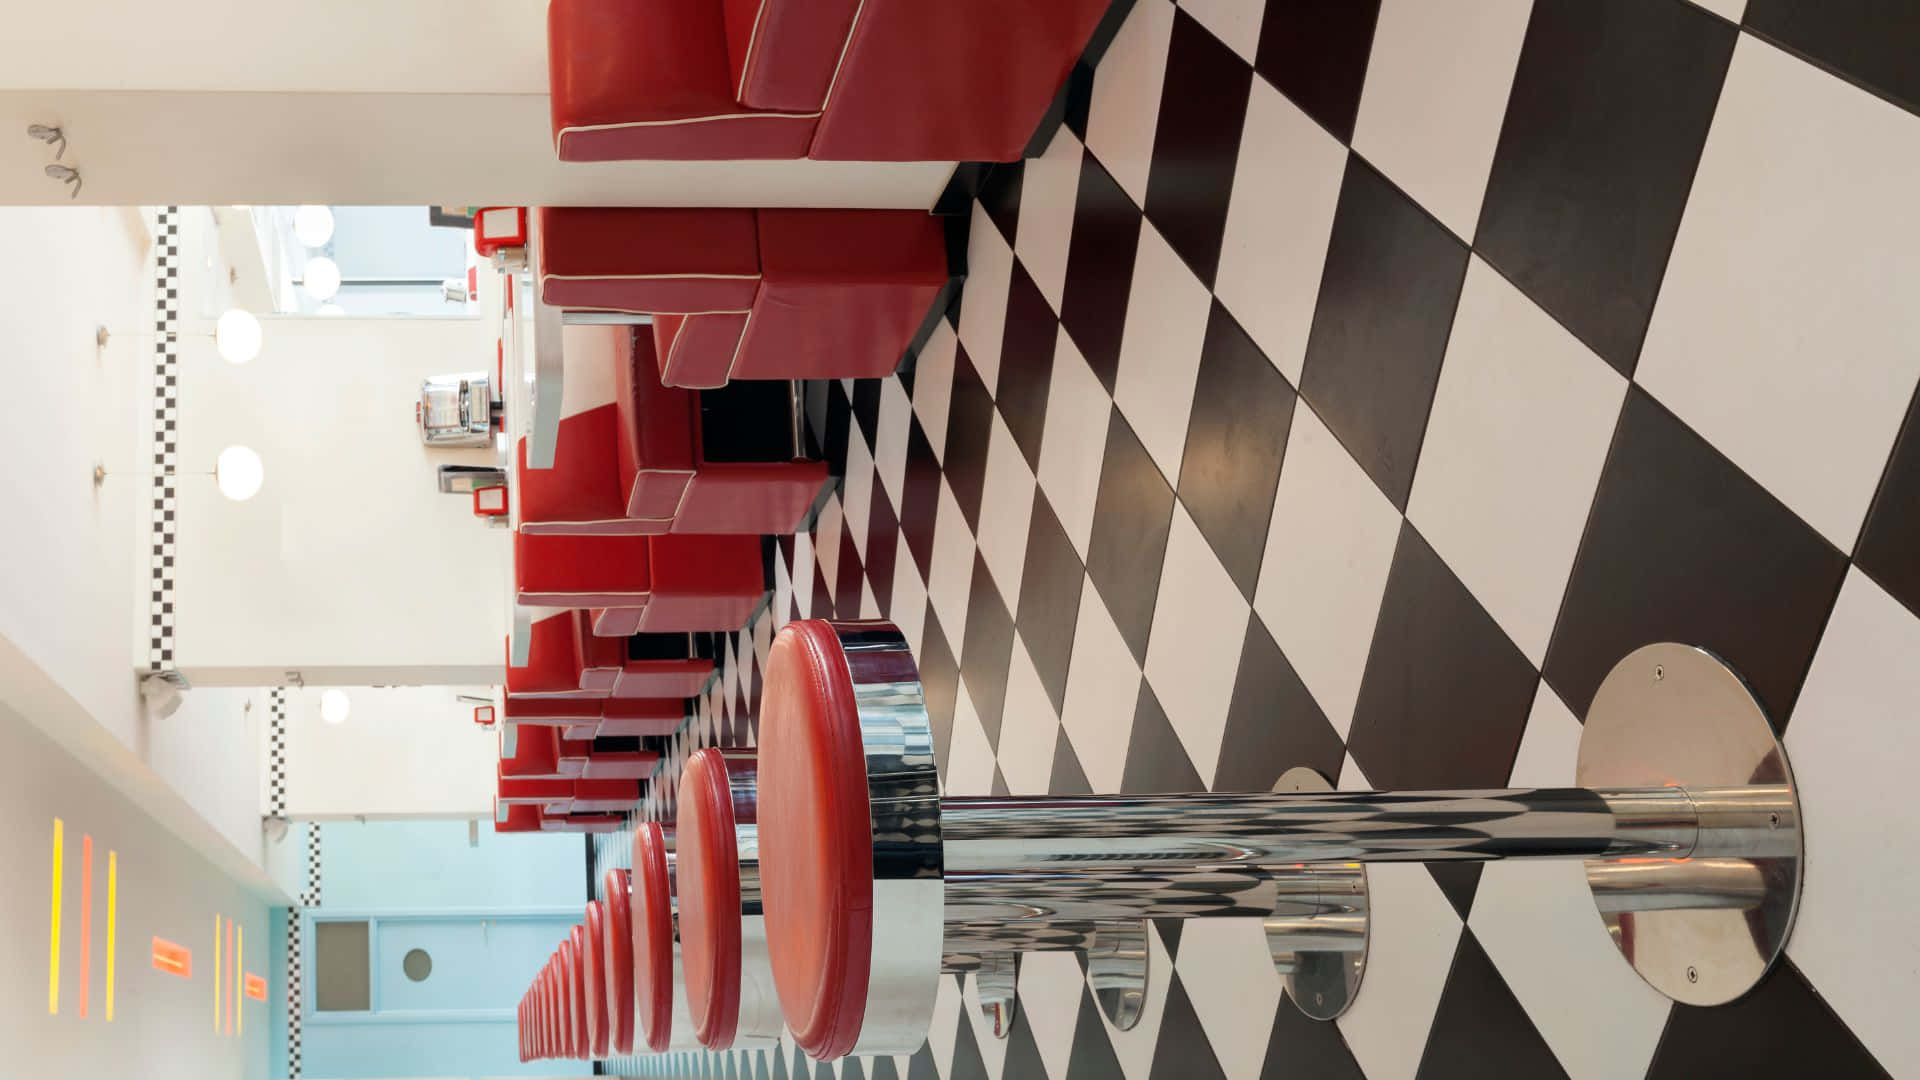 A retro diner with vintage charm and a lively atmosphere